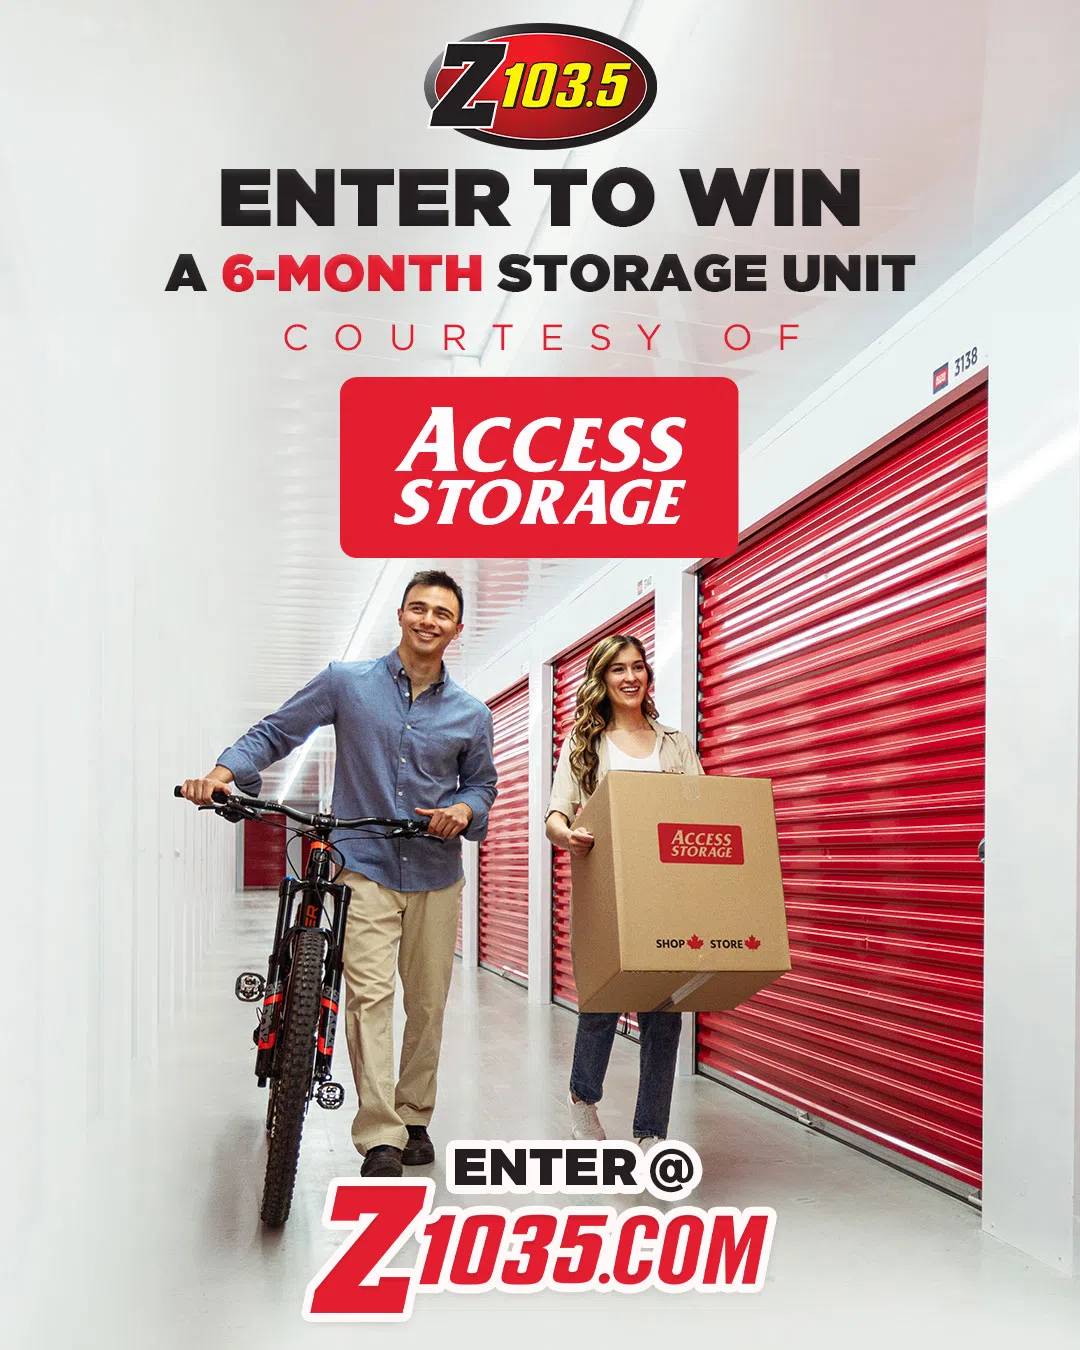 Feature: https://z1035.com/win/enter-to-win-storage-unit-by-access-storage-2/